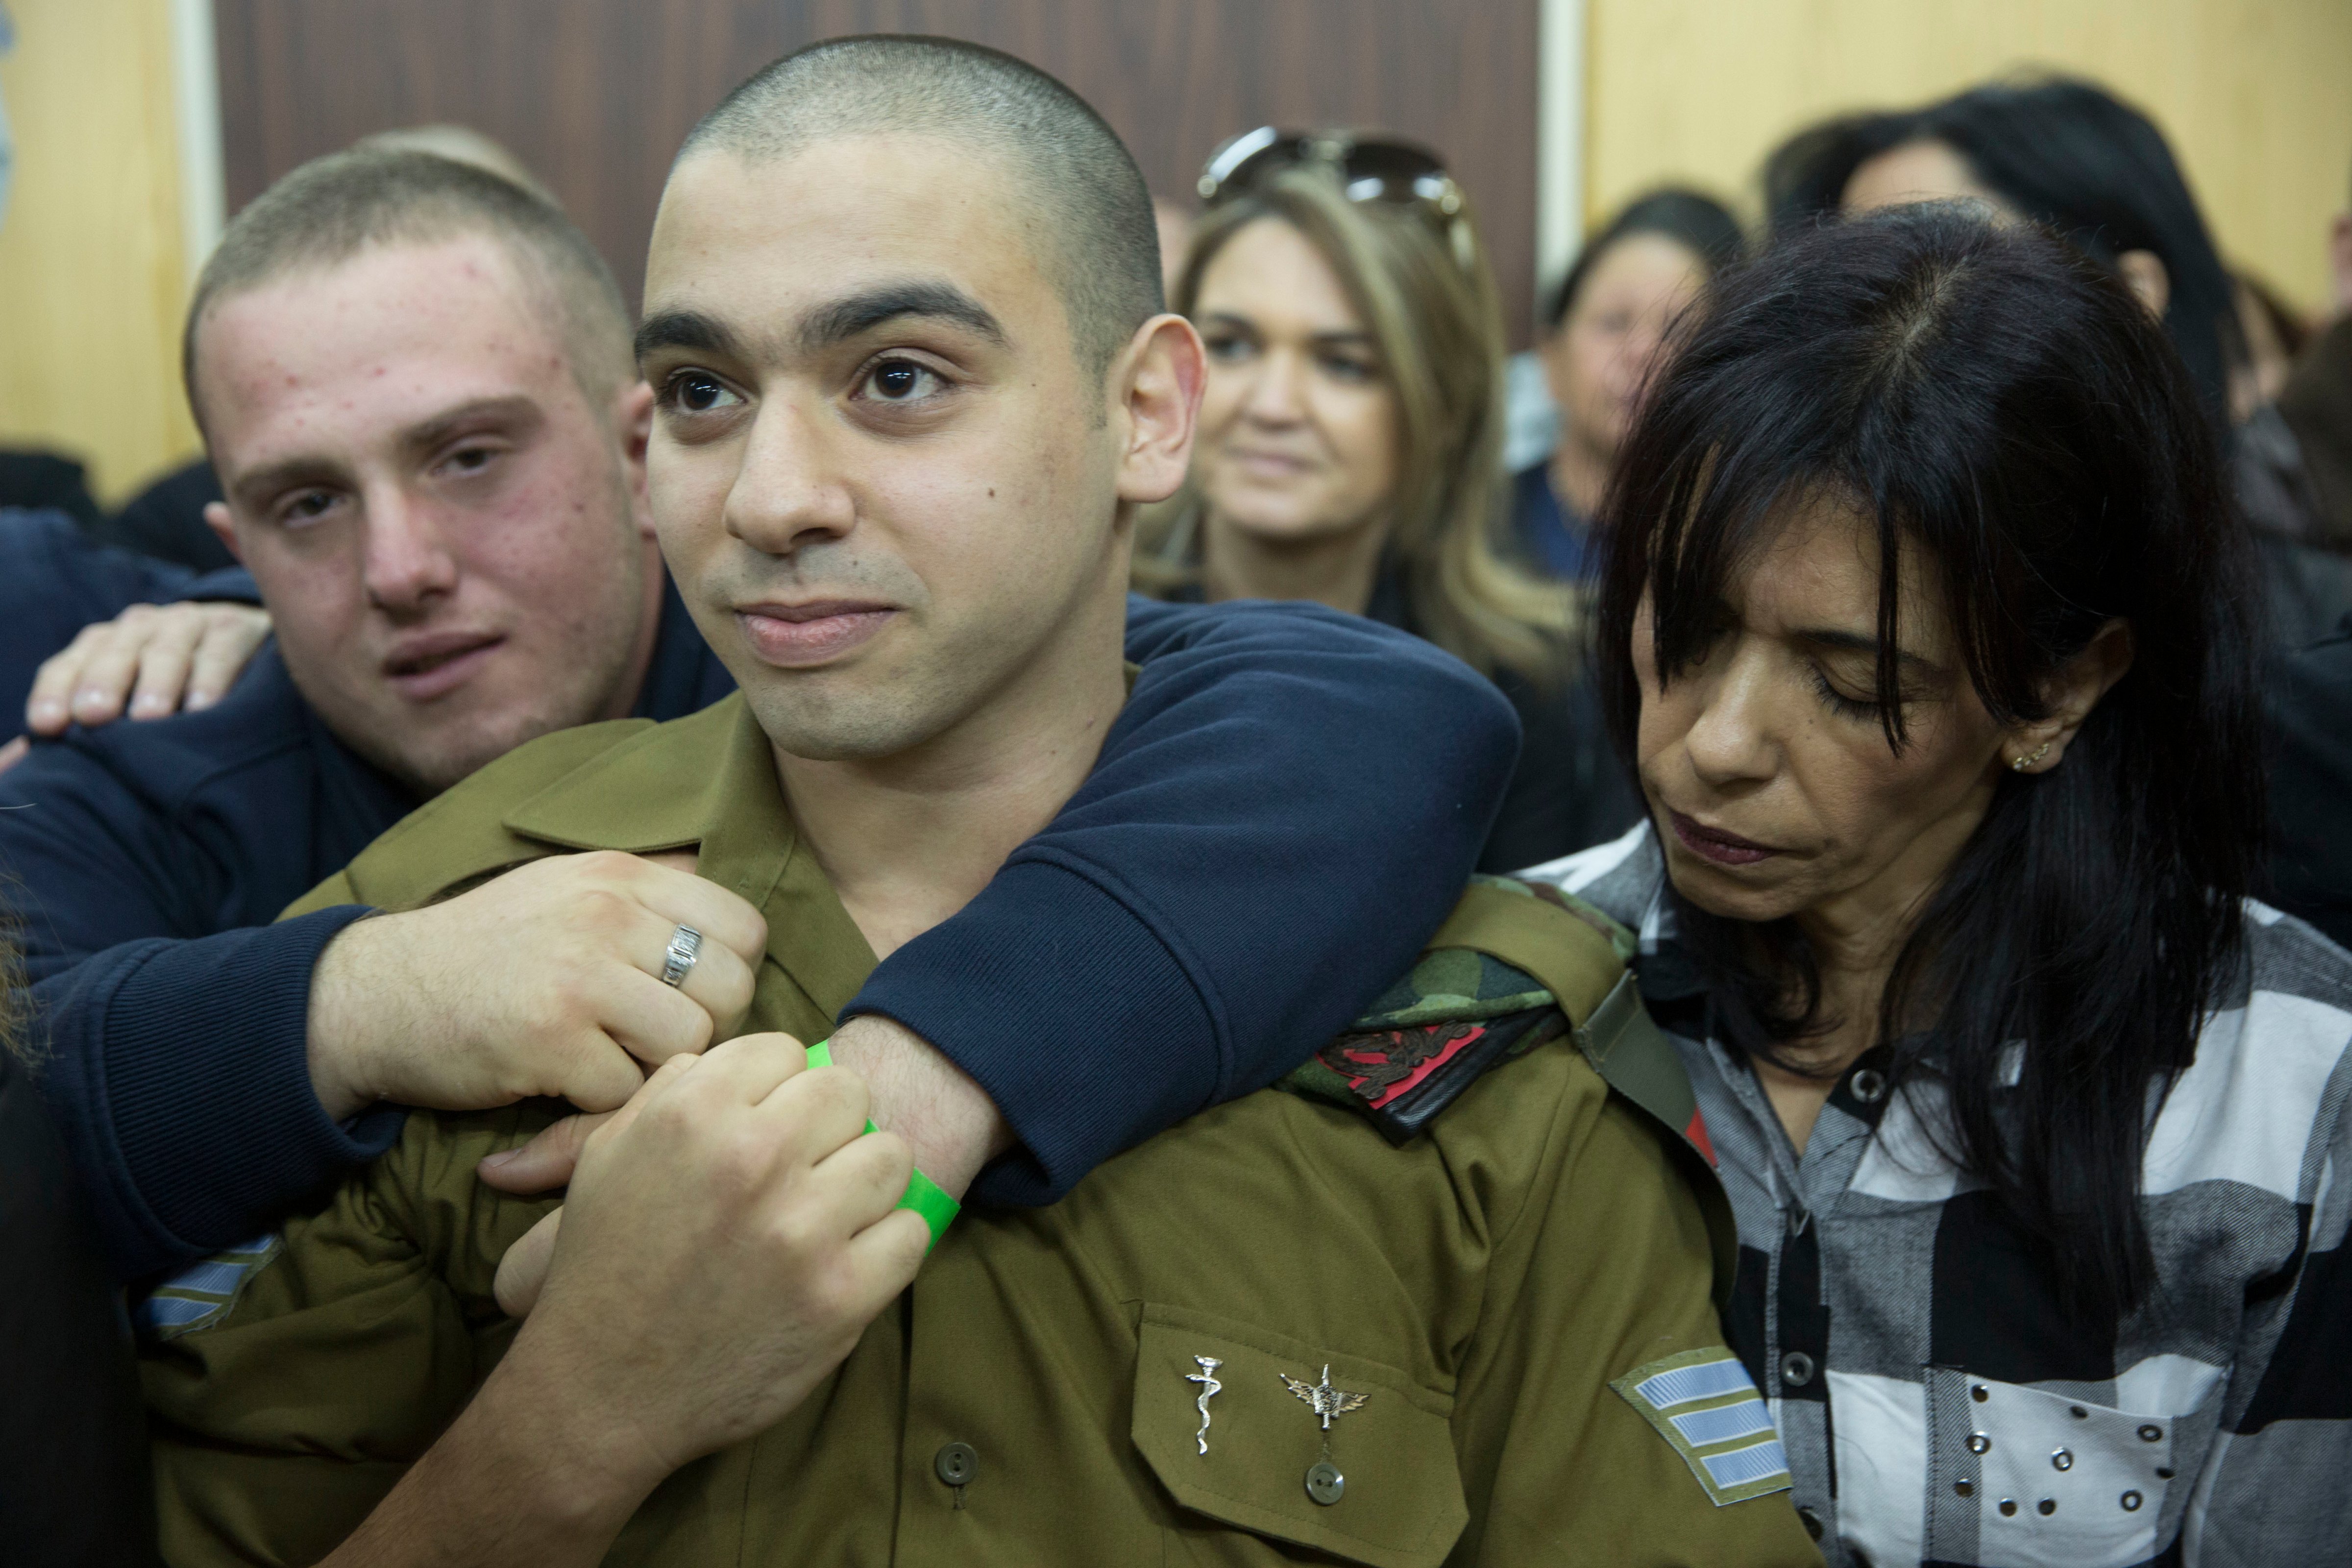 Elor Azaria waits with his parents for the verdict inside the military court in Tel Aviv, Israel, on Jan. 4, 2017. (Heidi Levine—AP)